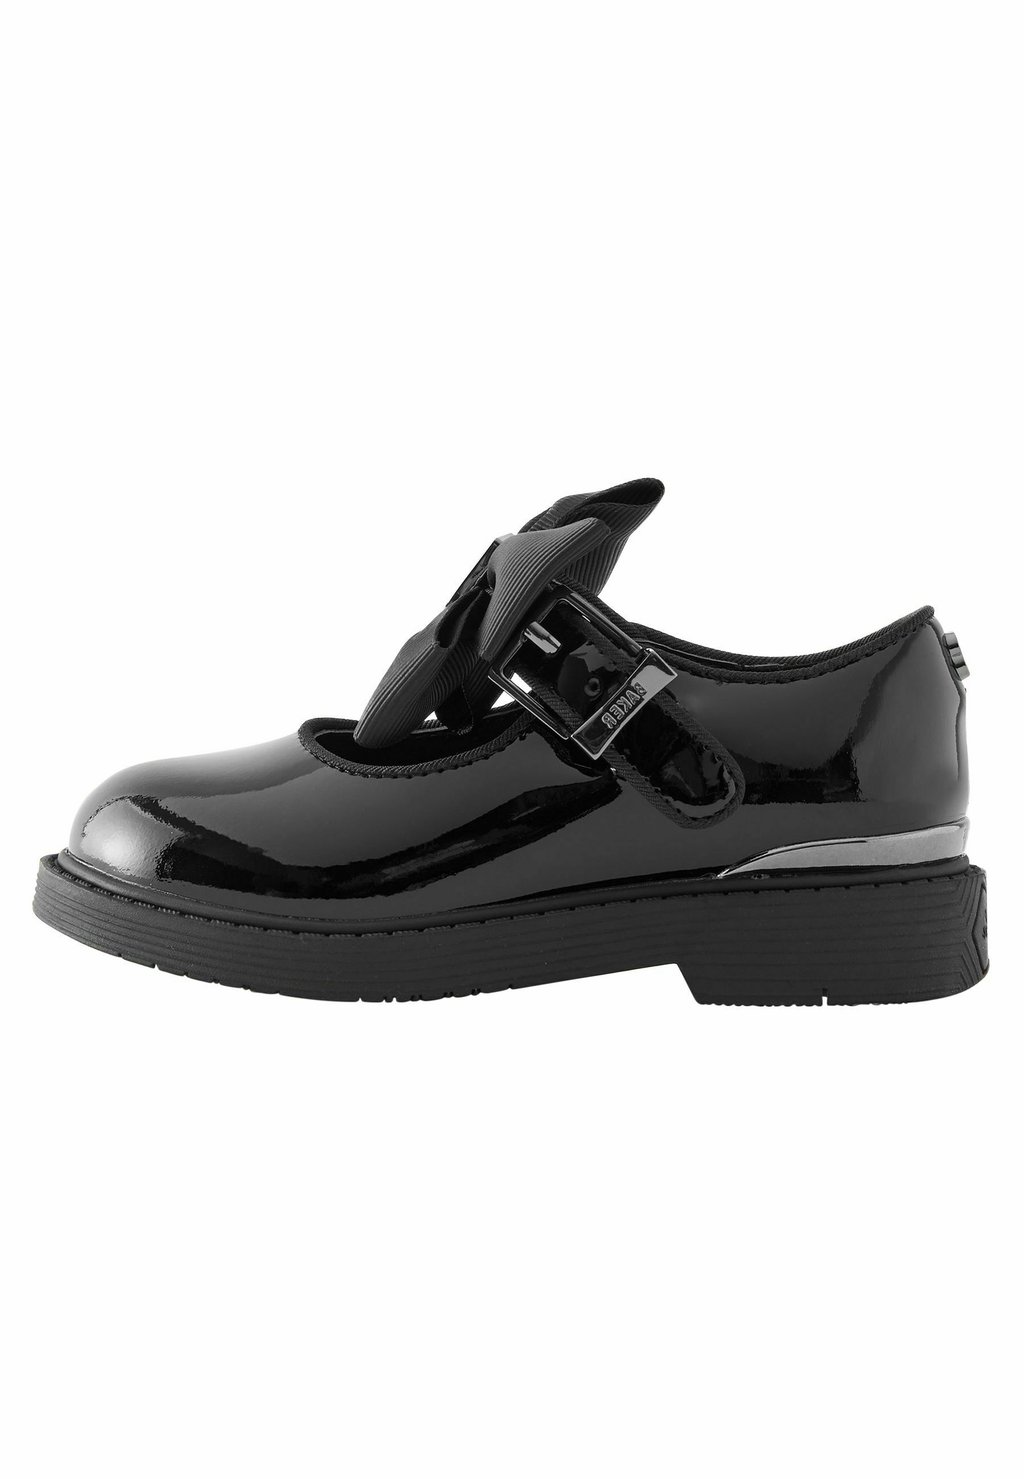 кроссовки ted baker lornea white black Балетки BAKER BY TED BAKER GIRLS BACK TO SCHOOL MARY JANE BLACK SHOES WITH BOW, цвет black